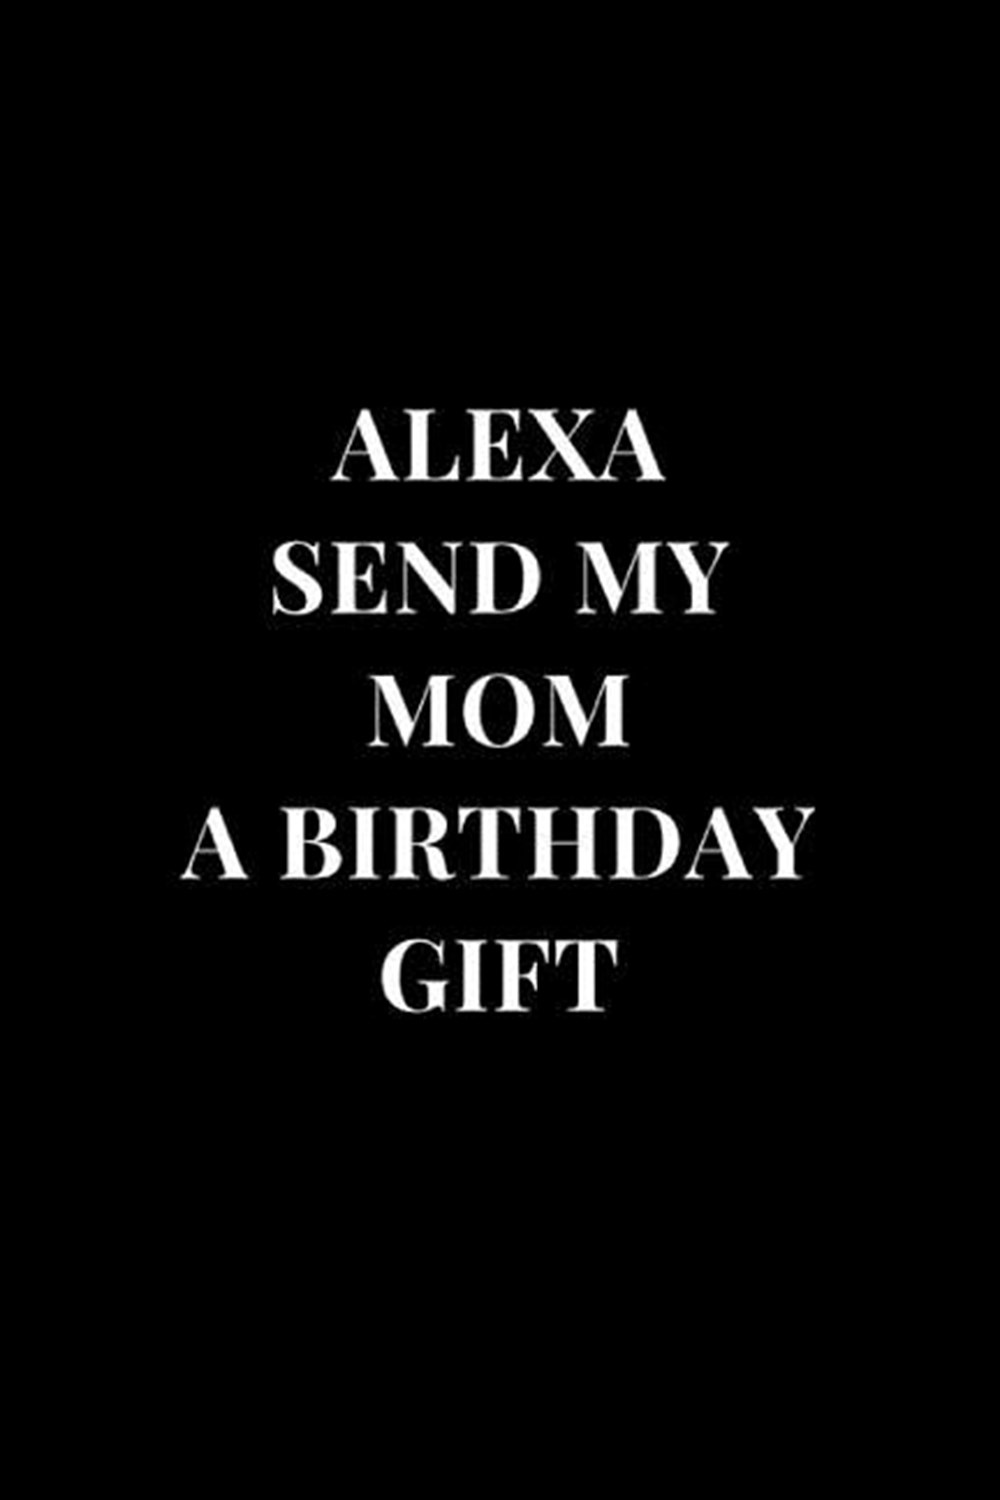 Alexa Send My Mom A Birthday Gift Gag Gift Funny Sarcasm Lined Notebook Journal